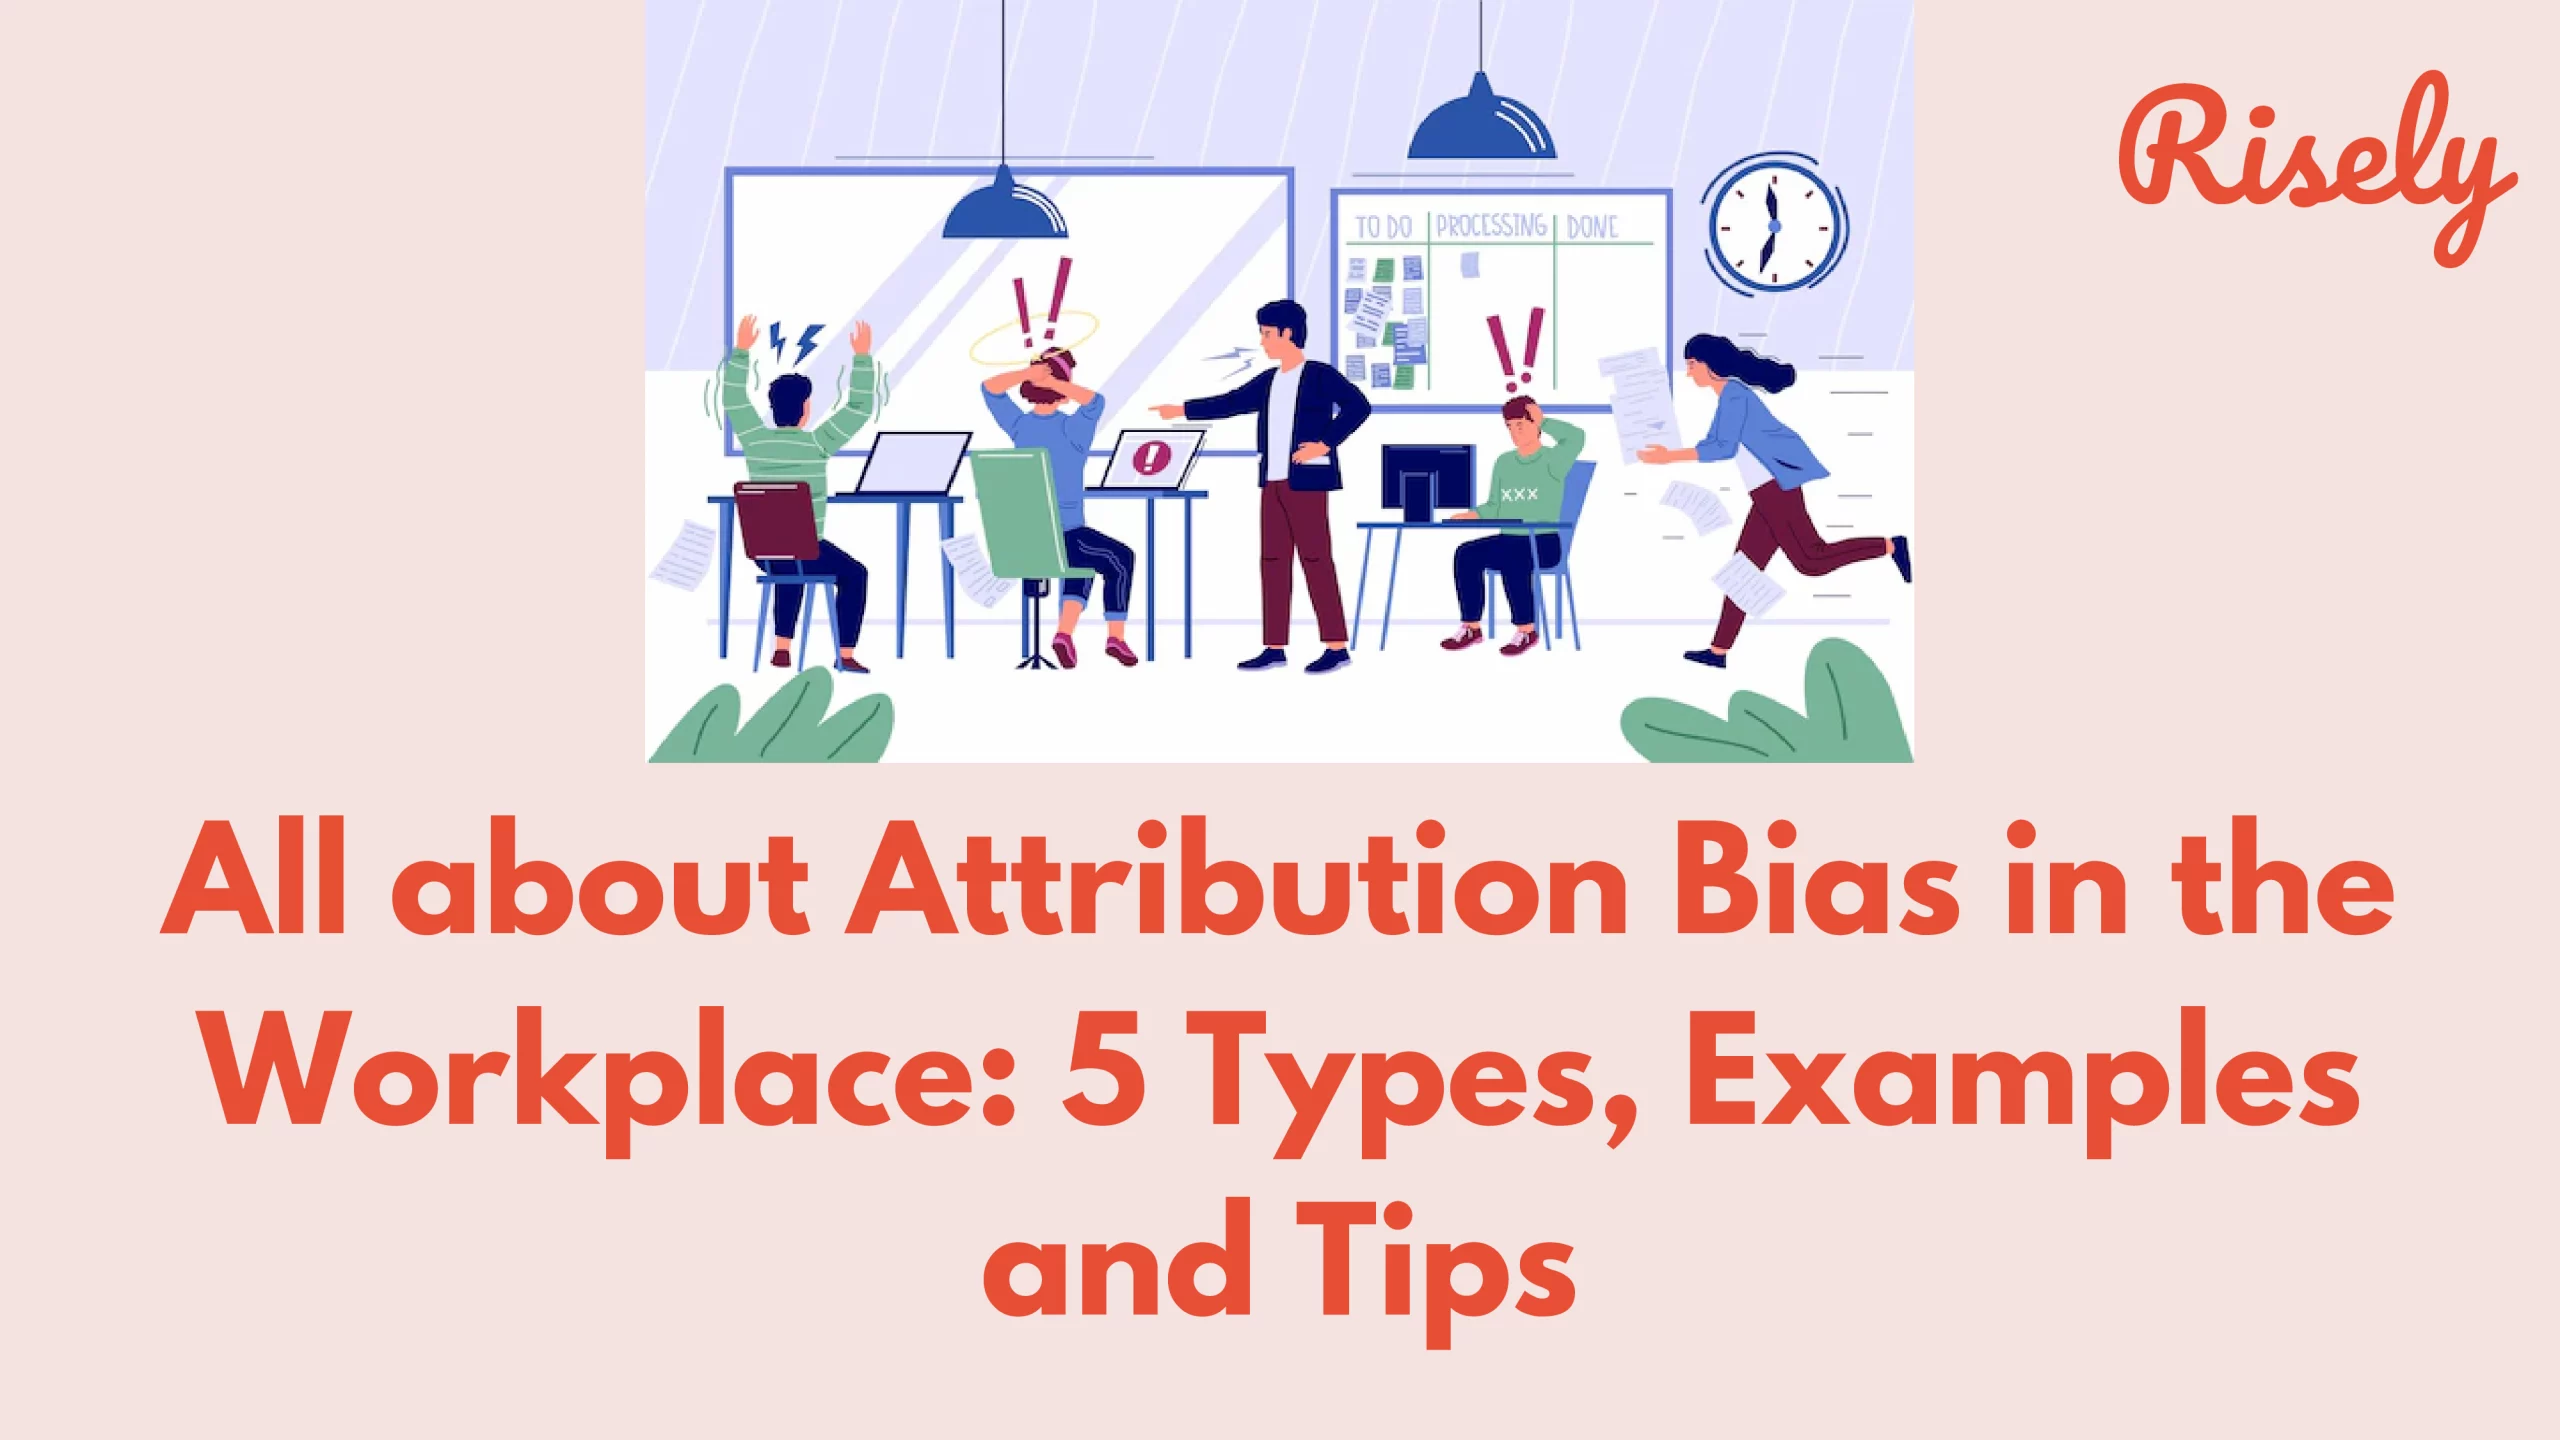 All about attribution bias in the workplace: 5 Types, examples and tips